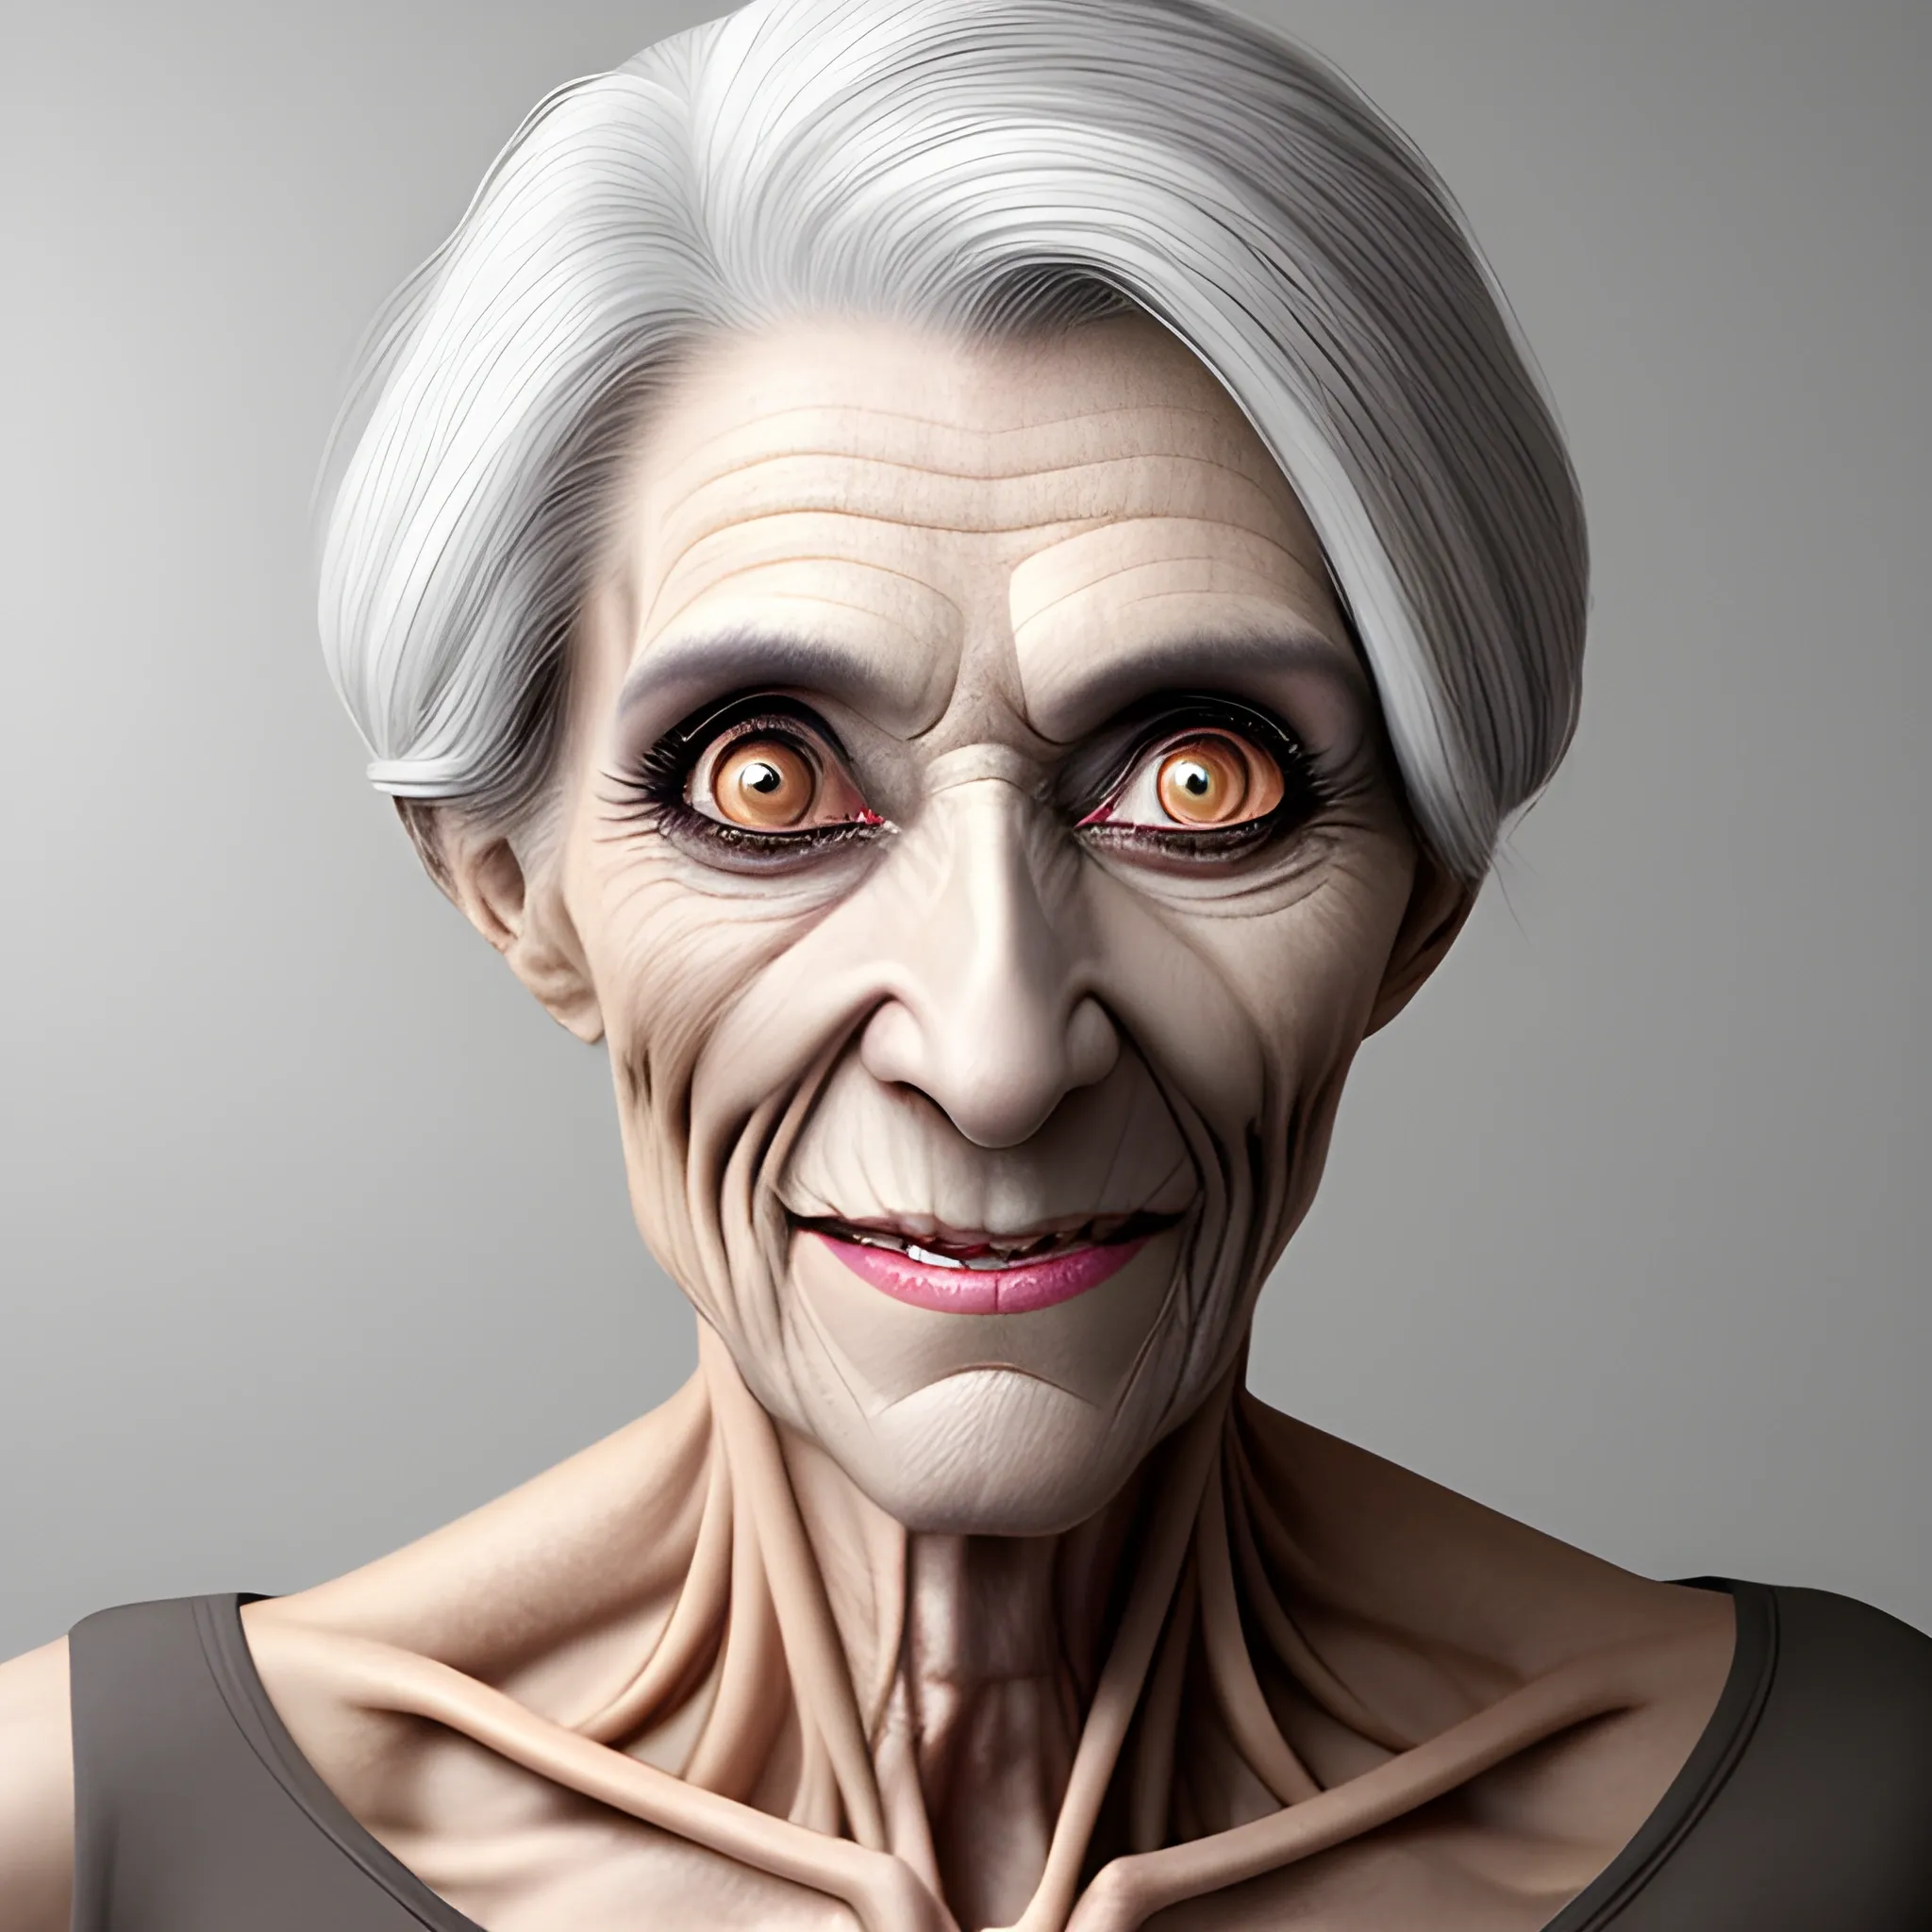 generate Older woman, bent over, eyes with cataracts, so skinny that her rib bones can be seen, little gray hair, crazy face in realistic photo